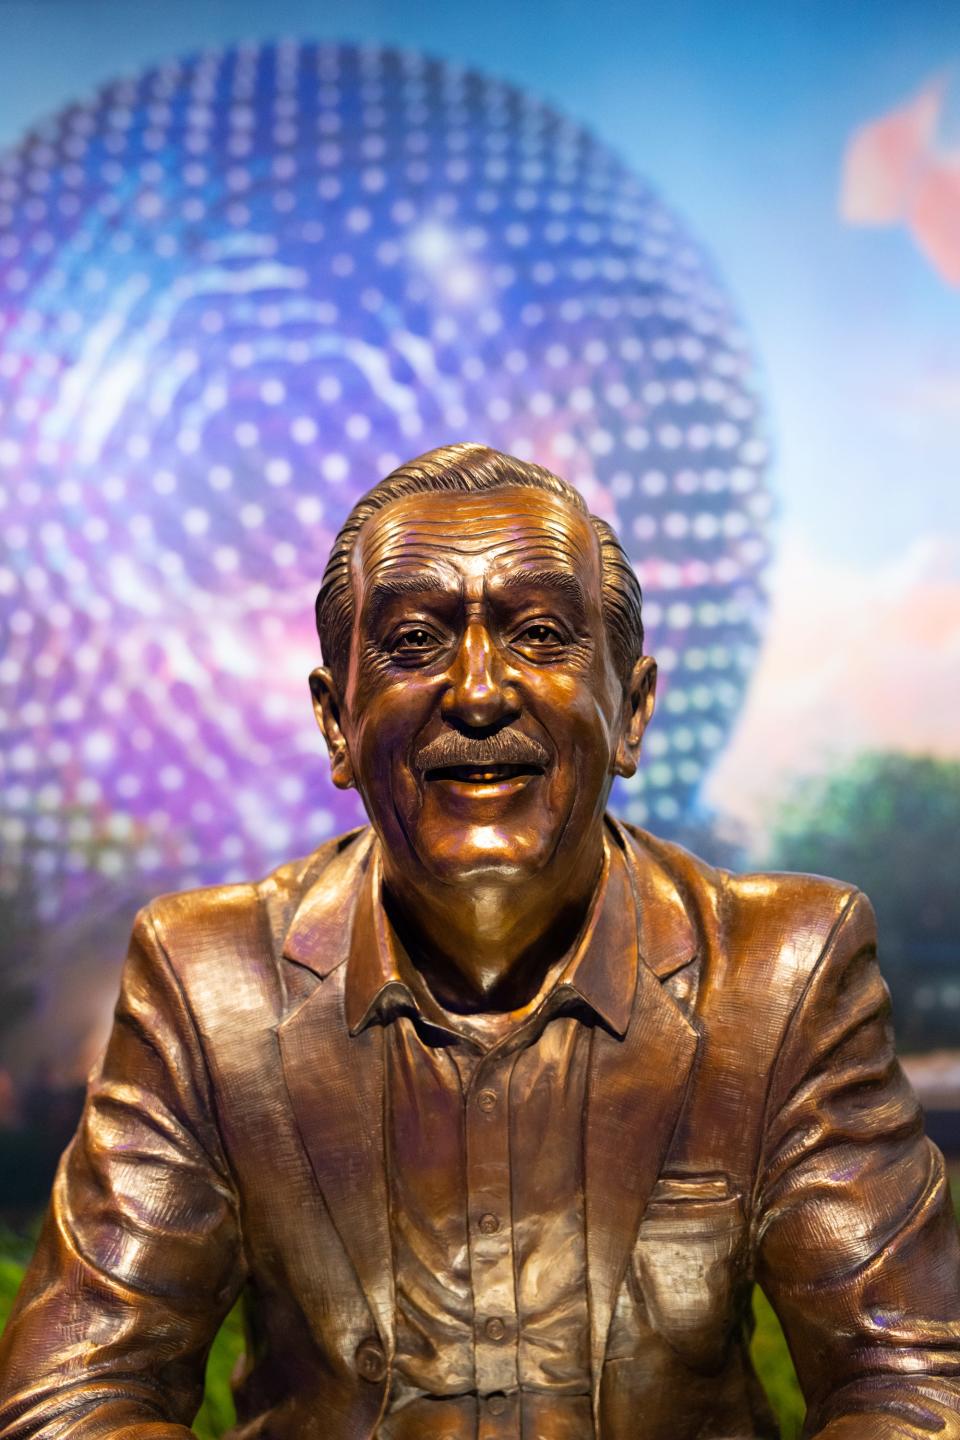 Disney unveiled this new statue of Walt Disney at D23.